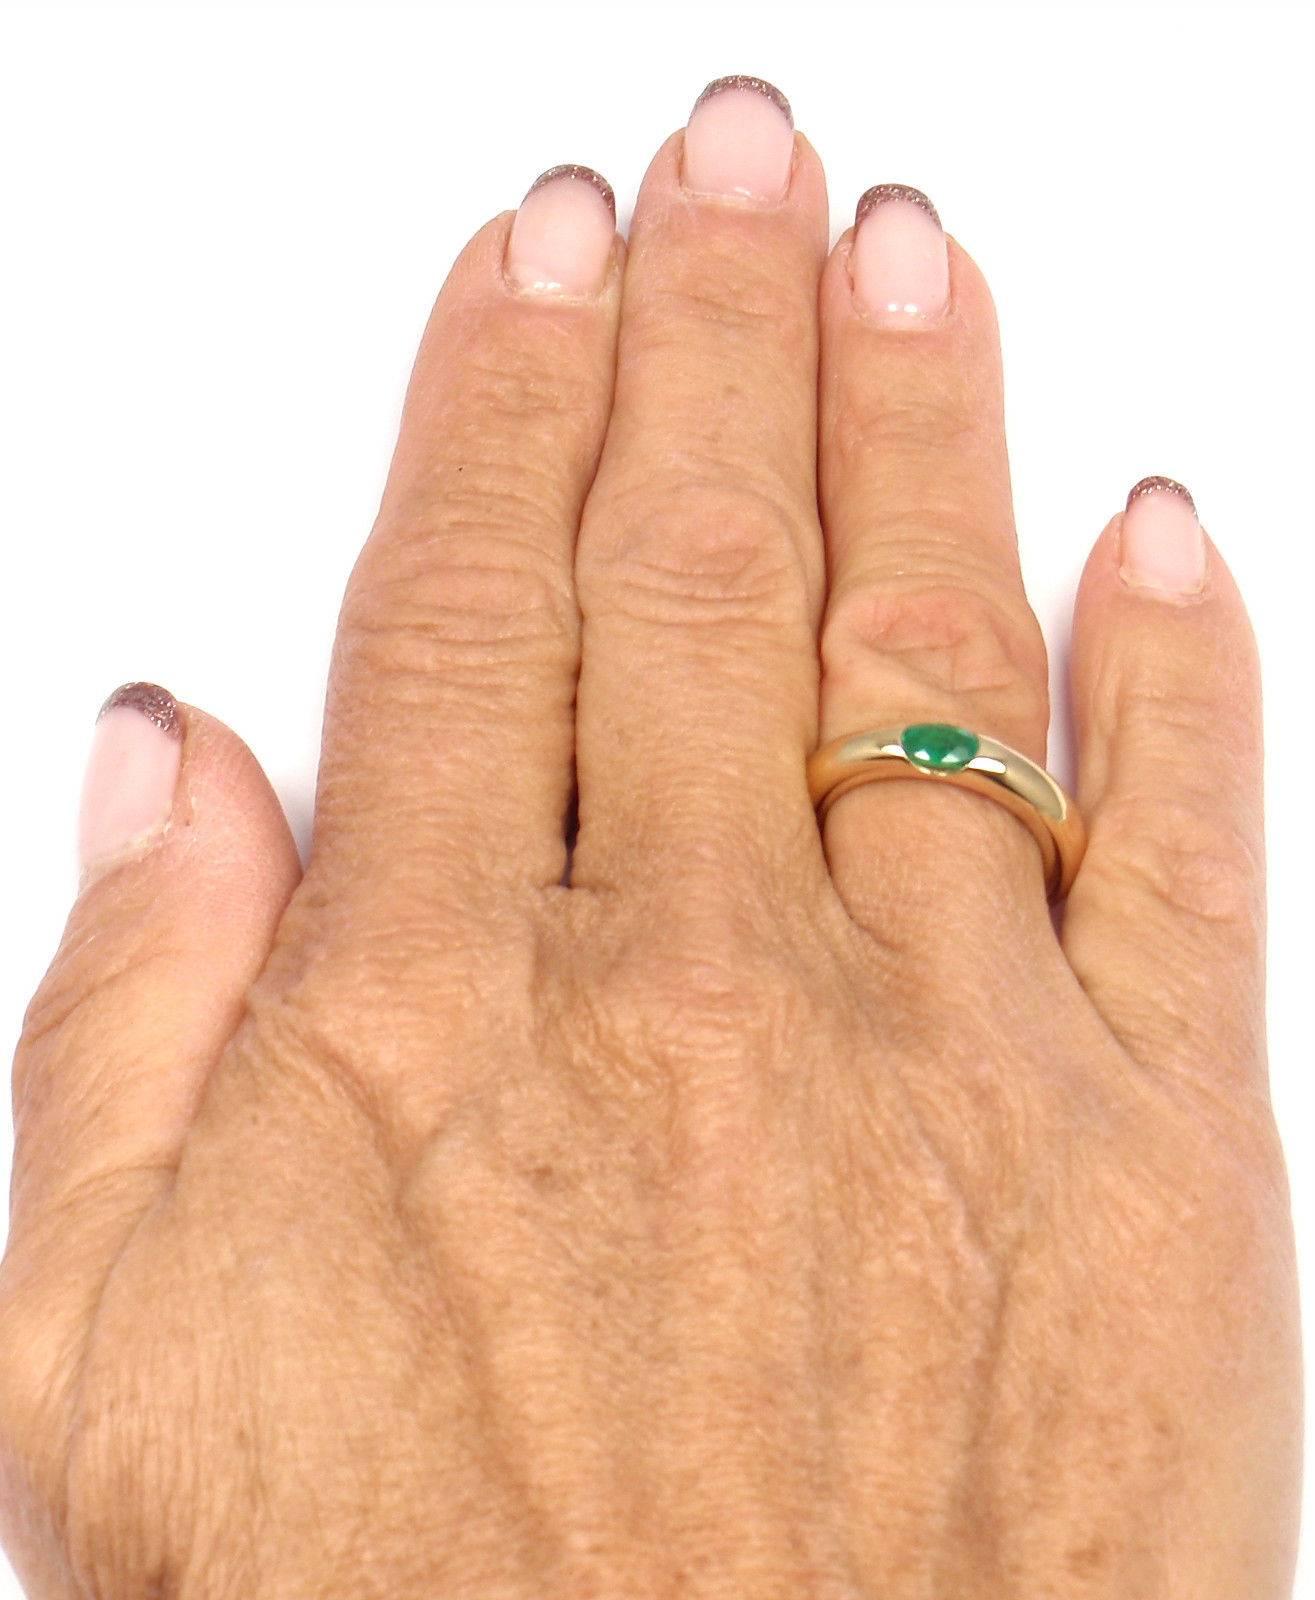 Cartier Emerald Ellipse Yellow Gold Band Ring 2